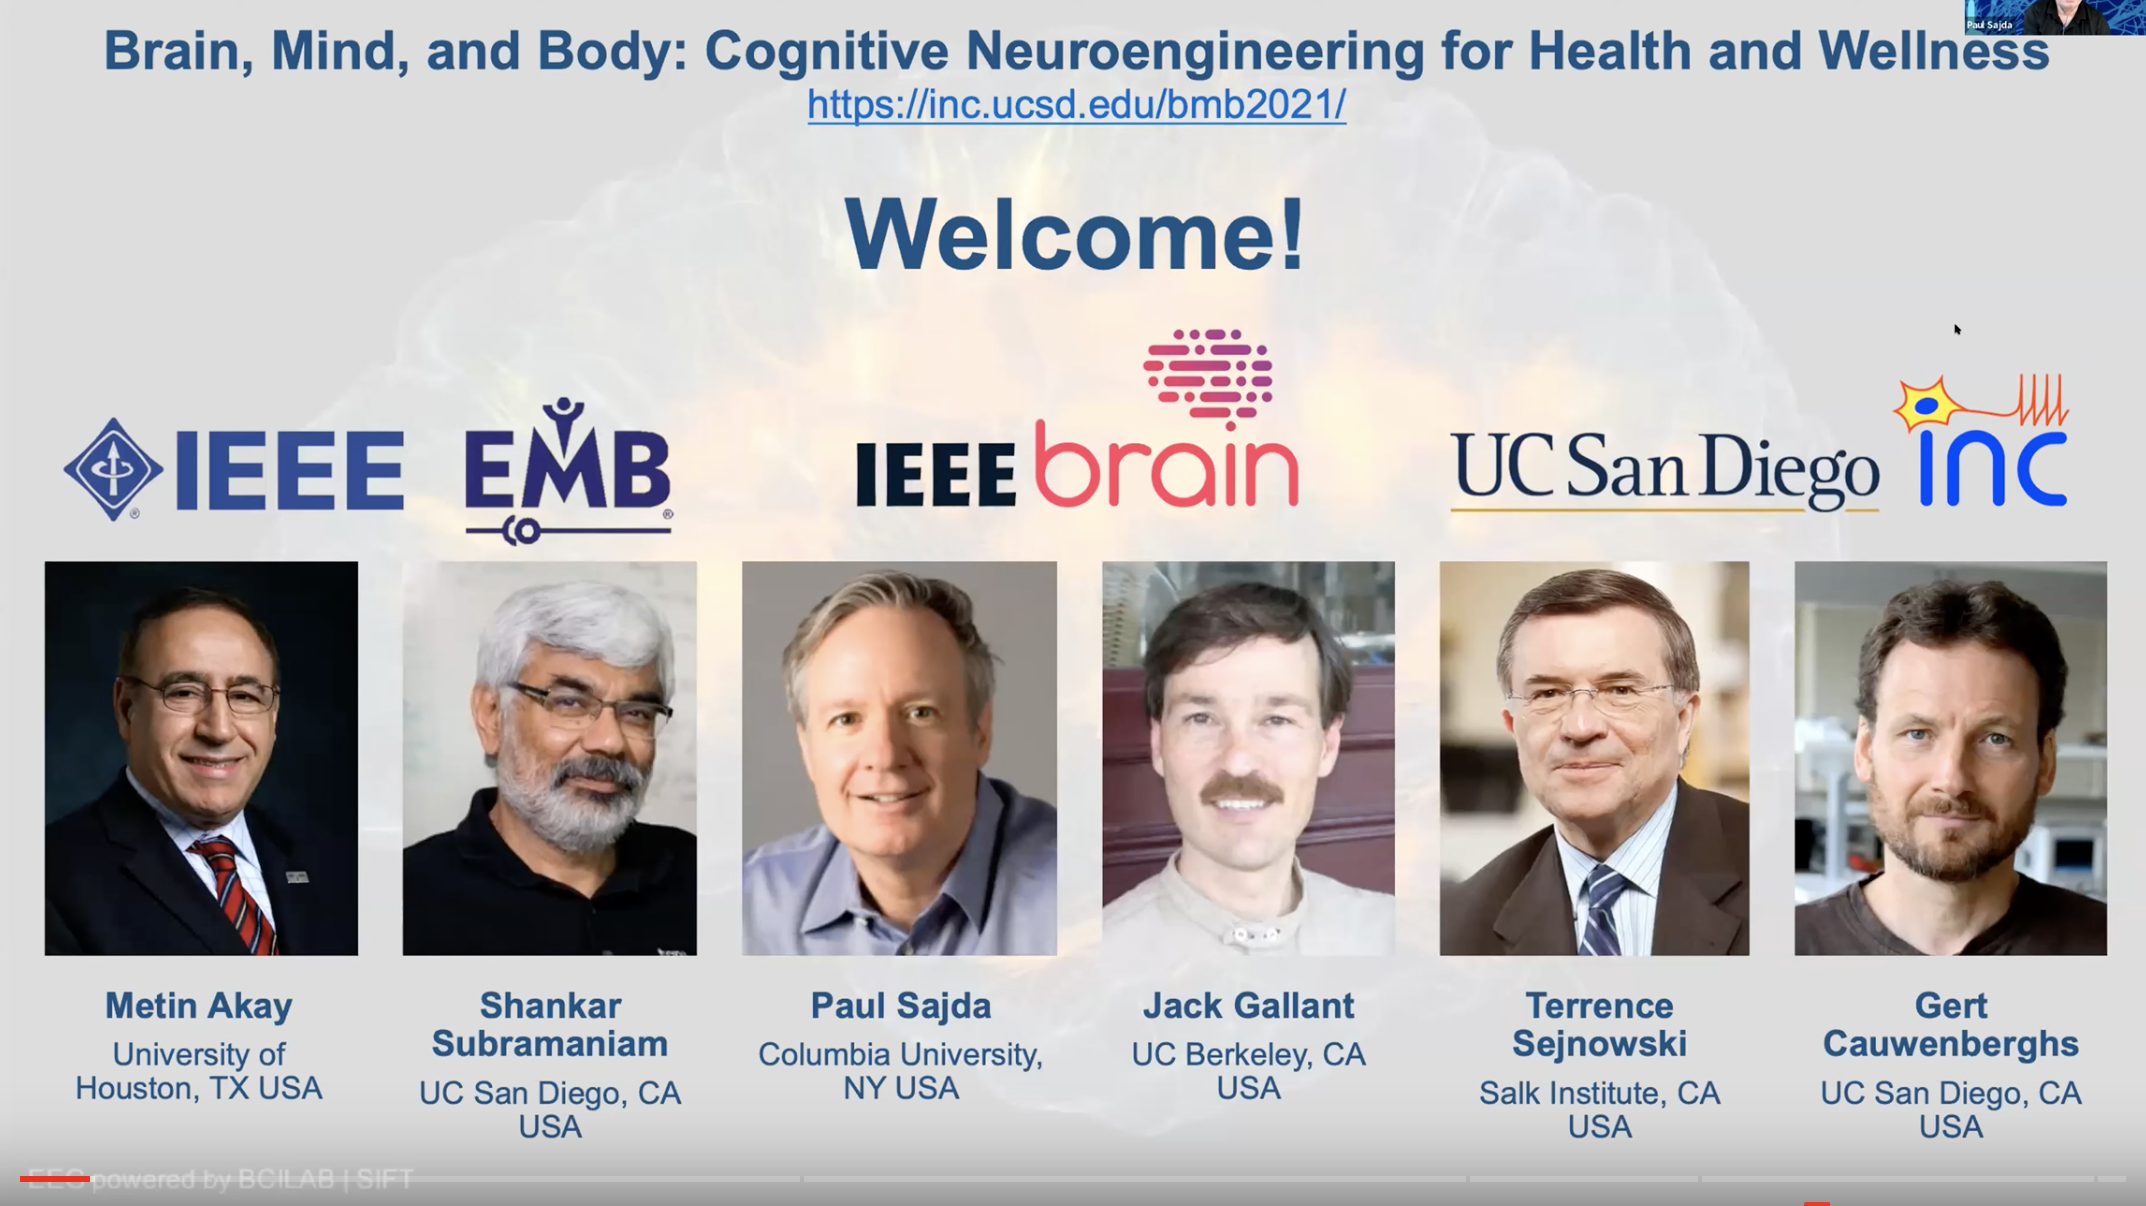 Brain, Mind, and Body: Cognitive Neuroengineering for Health and Wellness